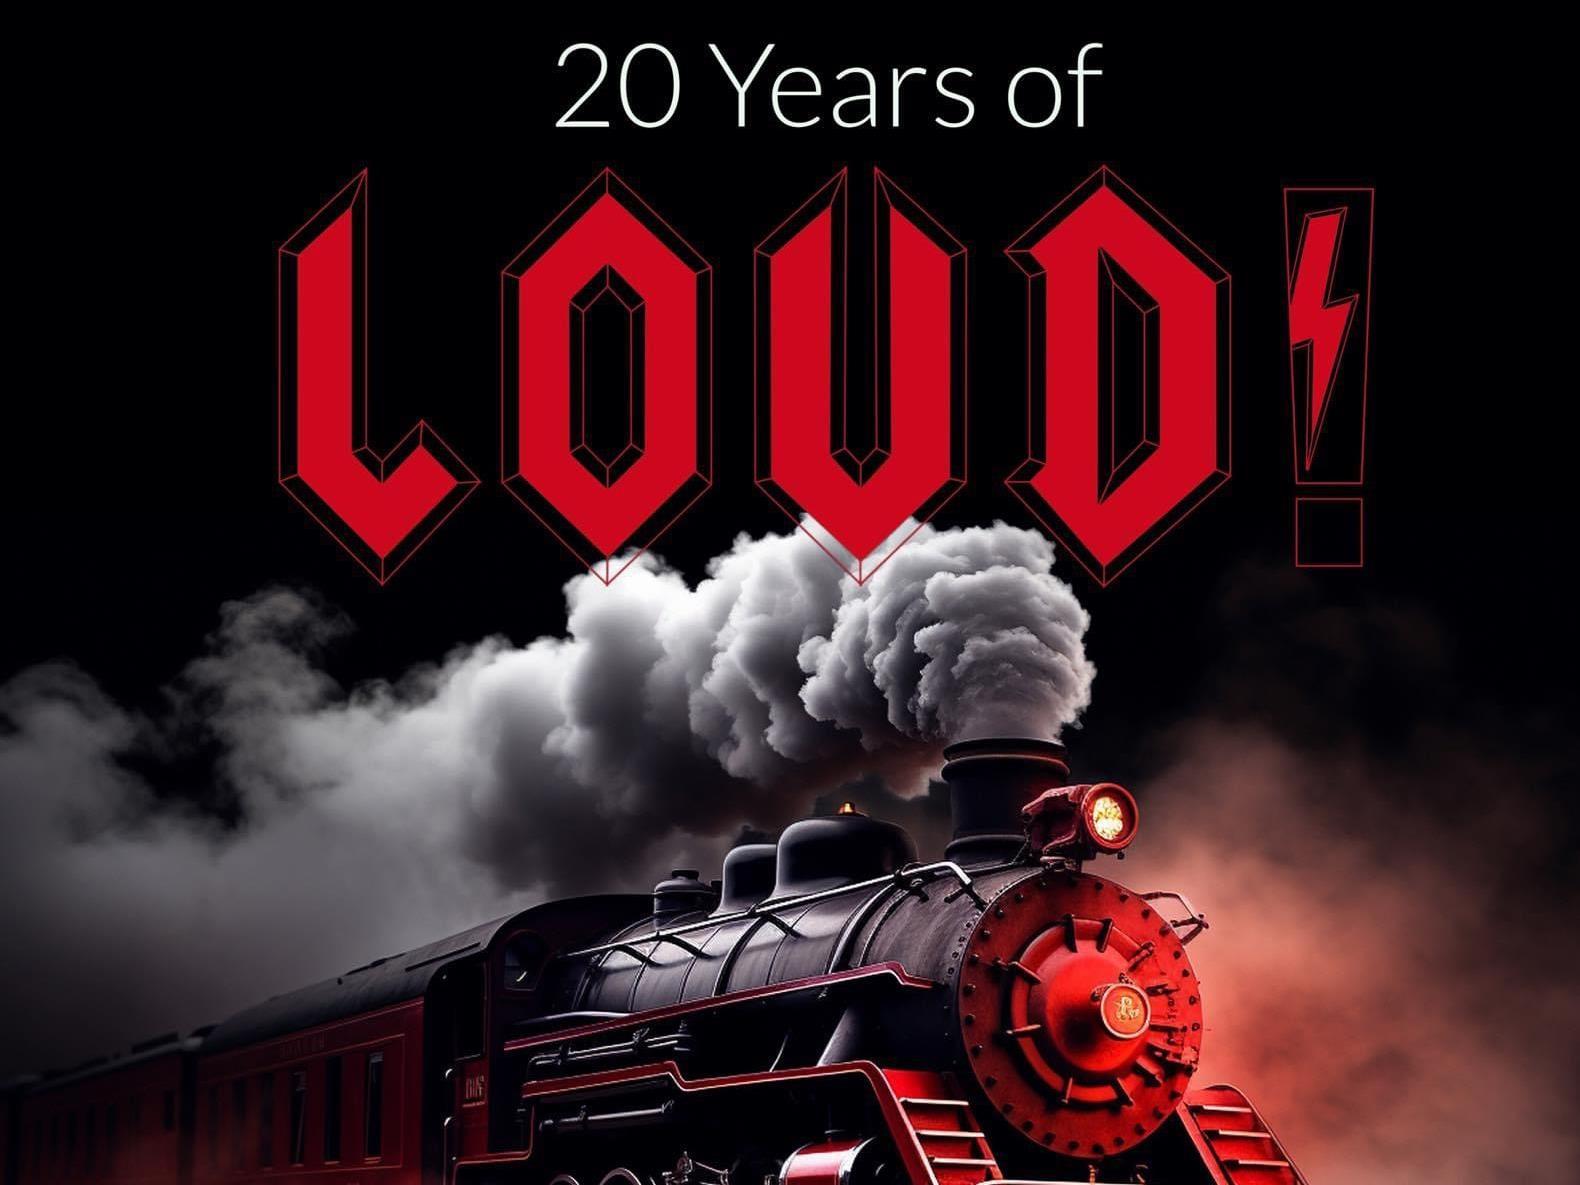 Concerto - "20 Years of LOUD!"